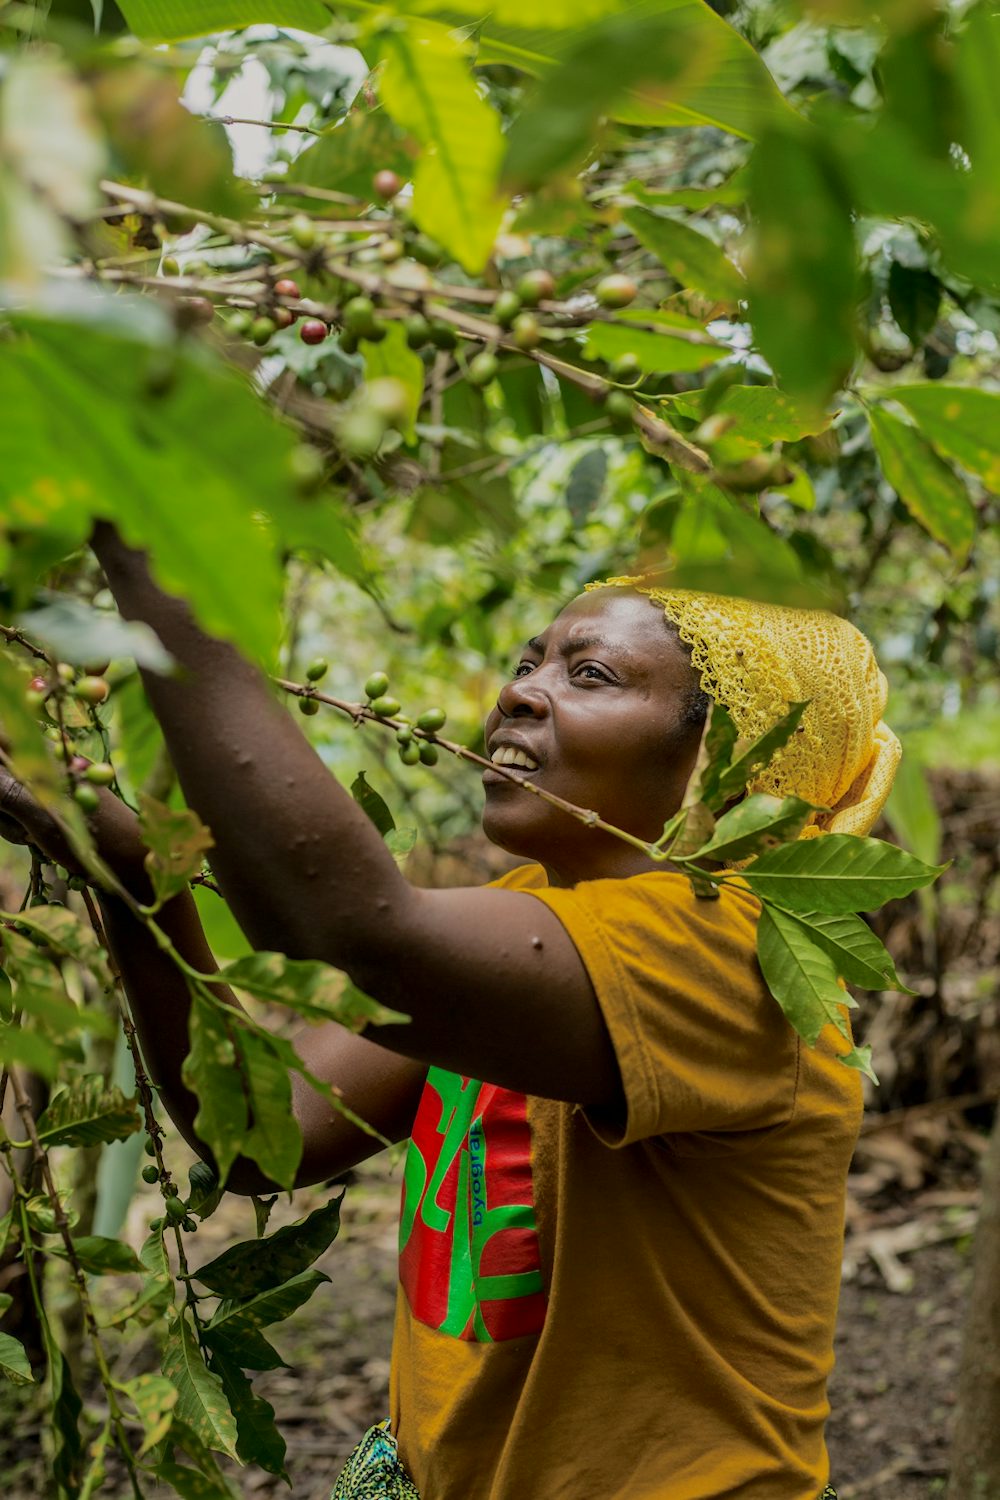 A woman harvests fruits from a tree.